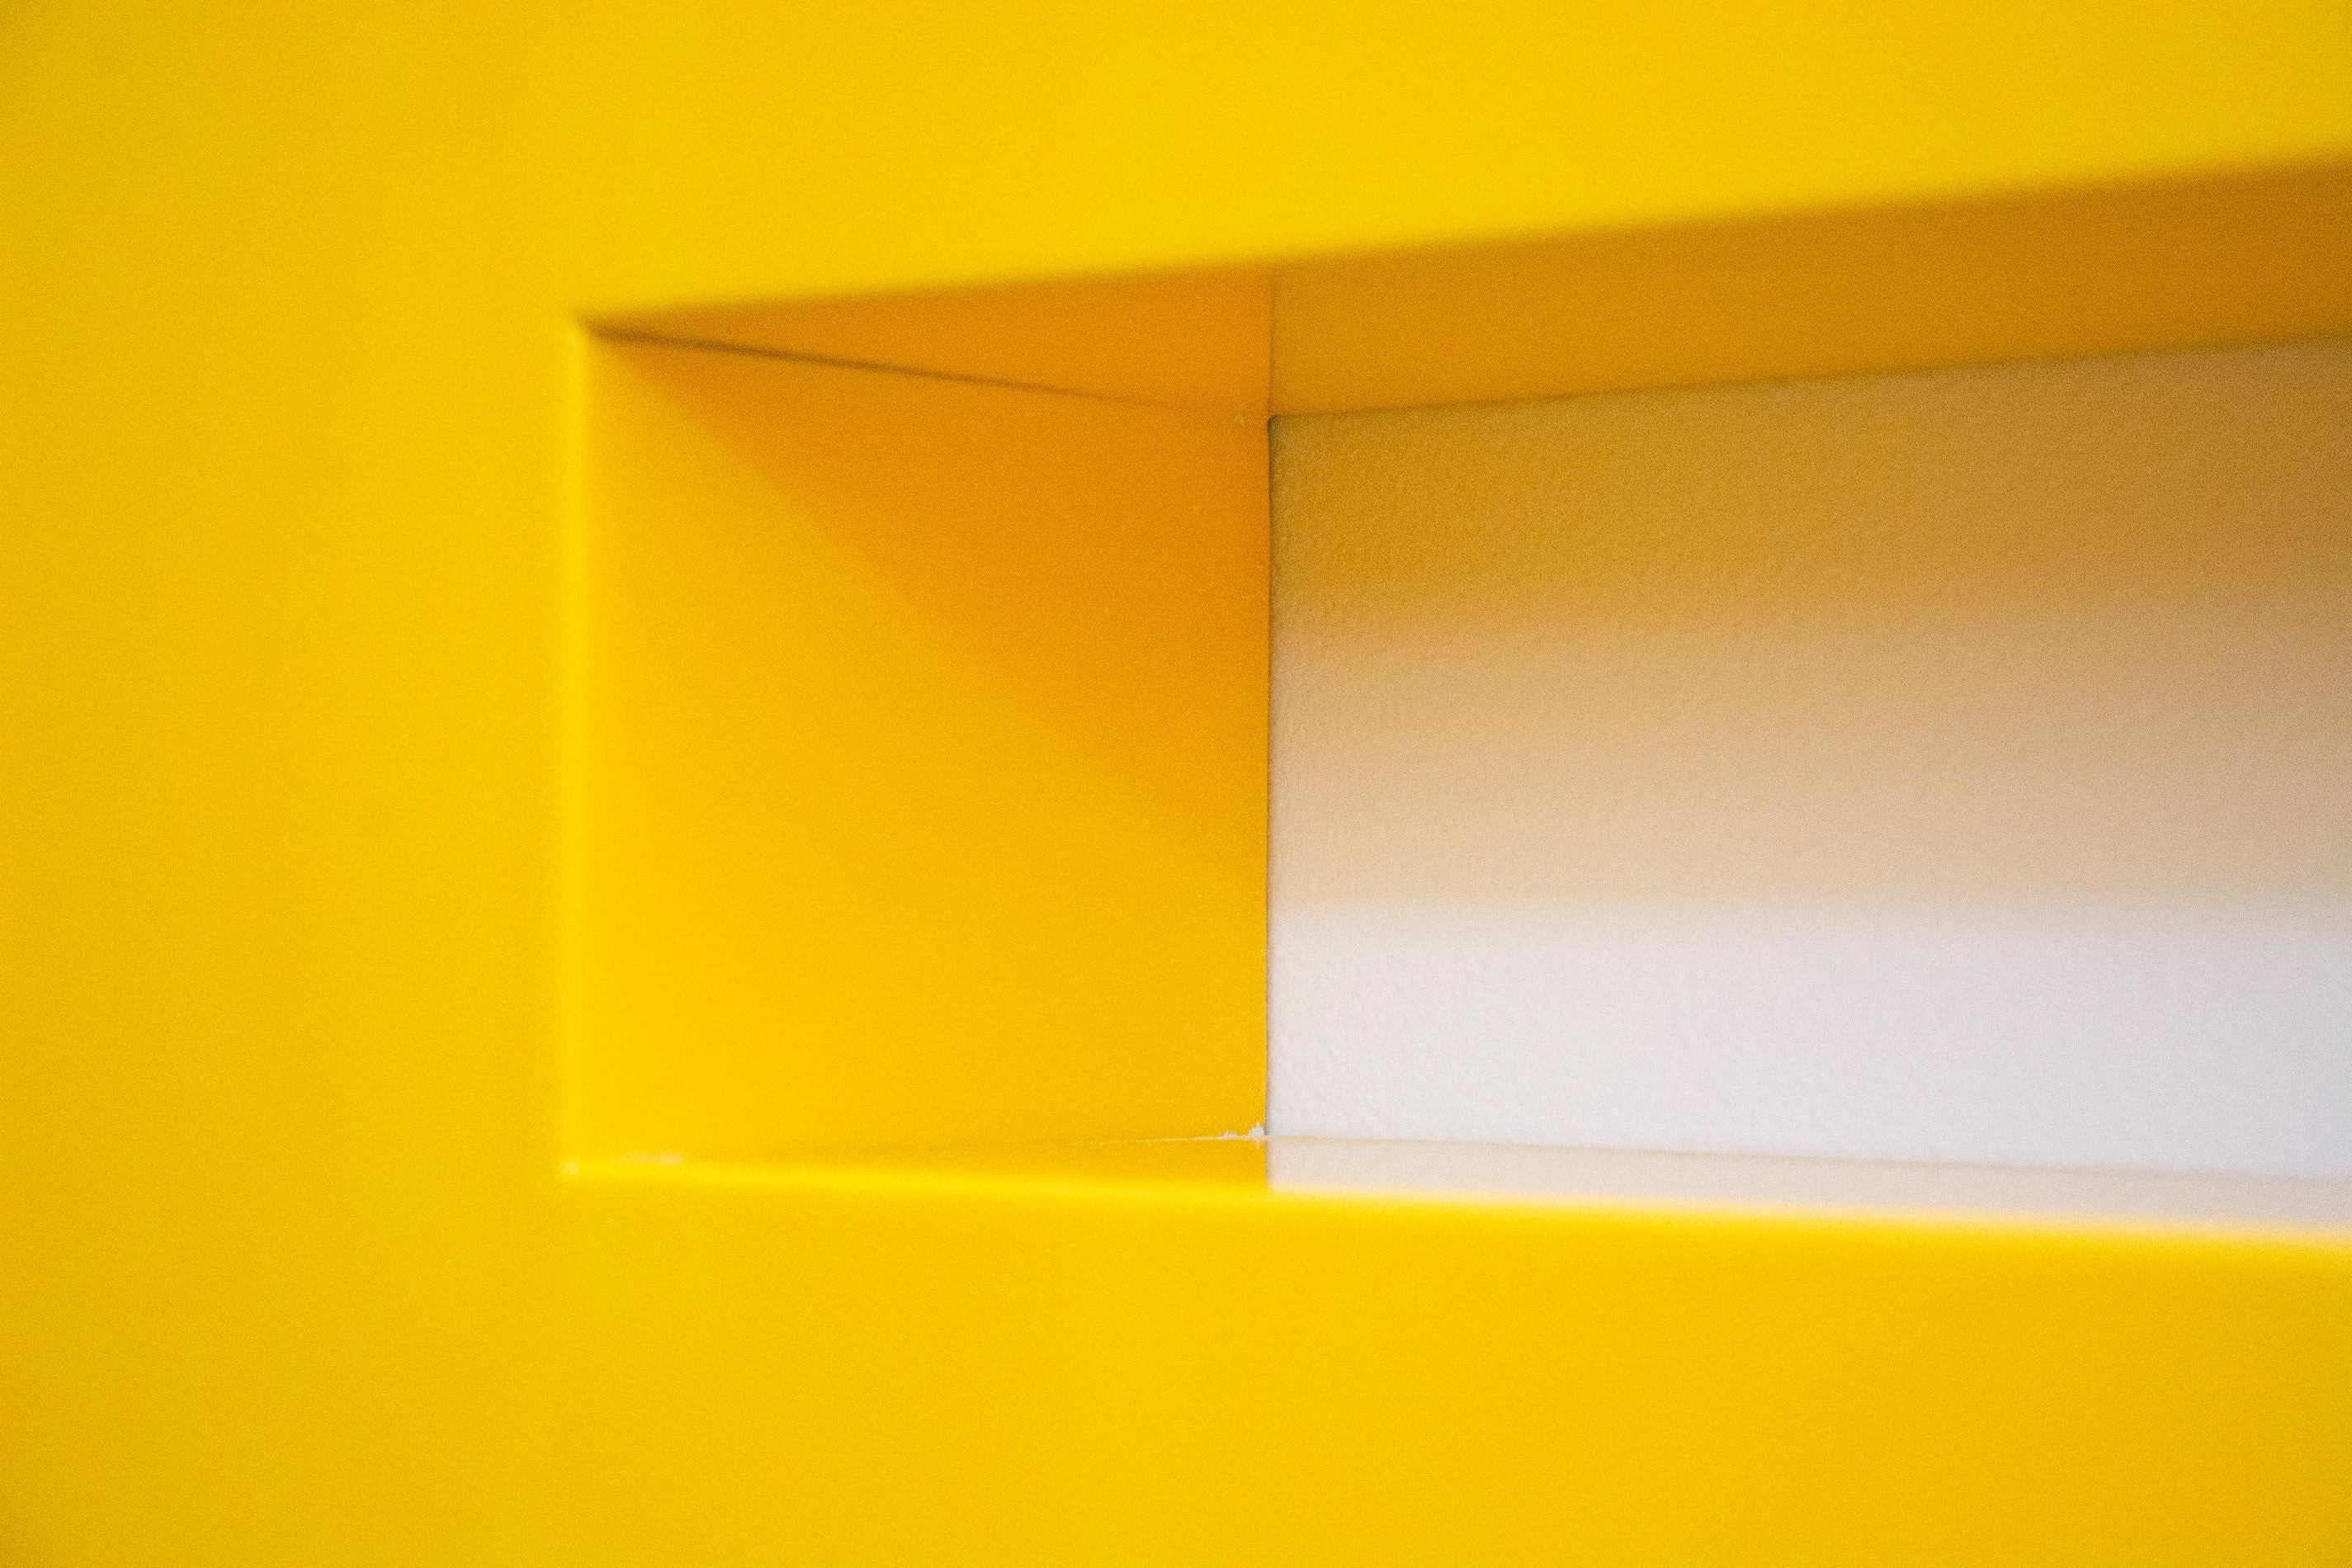 Foundations, Yellow - large, smooth, bright, glossy, abstract wall sculpture For Sale 1